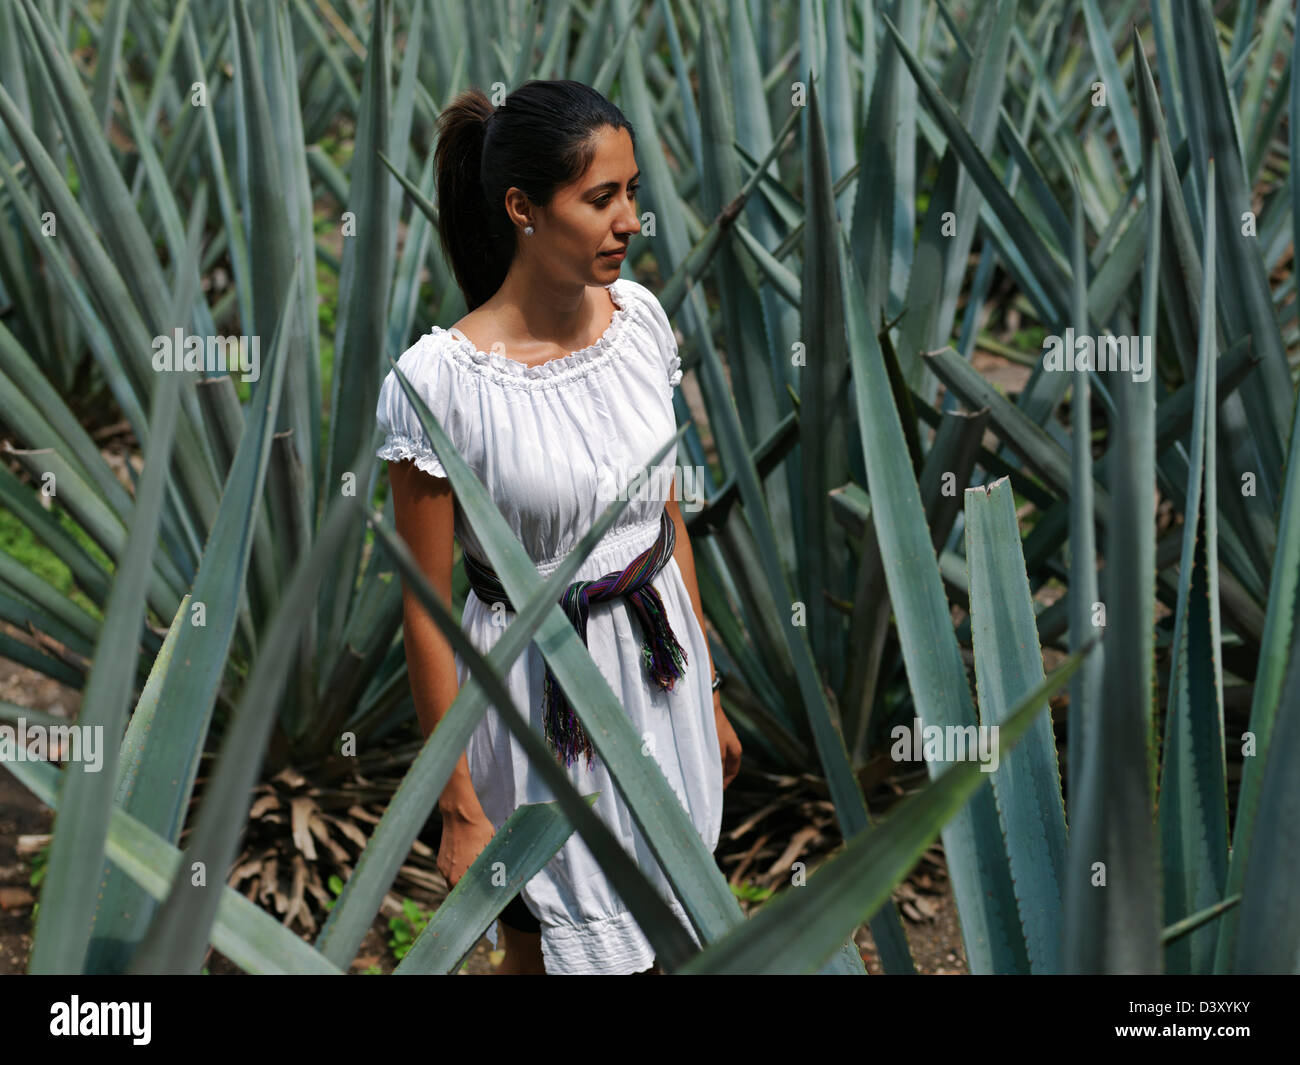 Mexico,Jalisco,Tequila, young Hispanic woman standing amongst blue agave plants used for the production of tequila Stock Photo